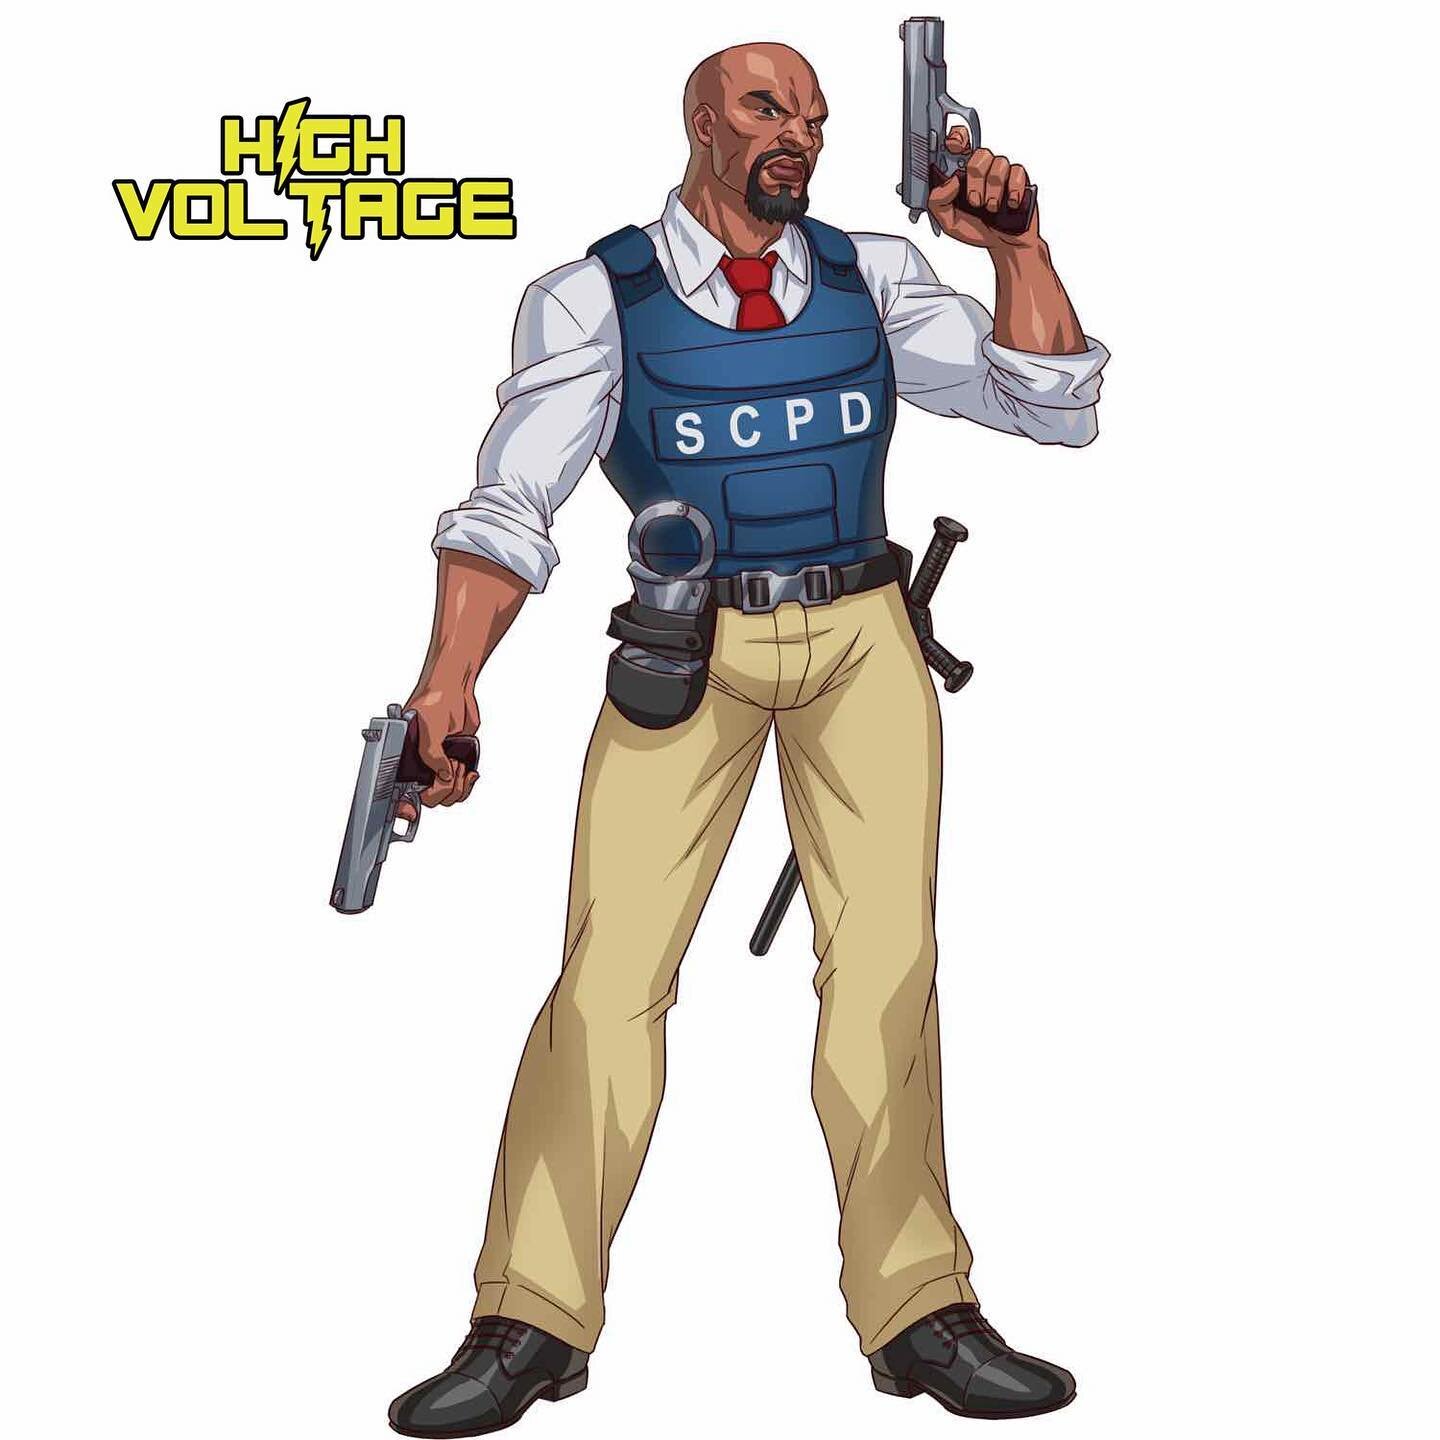 Annnddd it&rsquo;s done! Here is the completed image of Commissioner Watts 🙌🏾👏🏾!

In High Voltage, Commissioner Watts is the head honcho of the police force. He takes his job very seriously and wants to ensure the city is safe for its citizens an